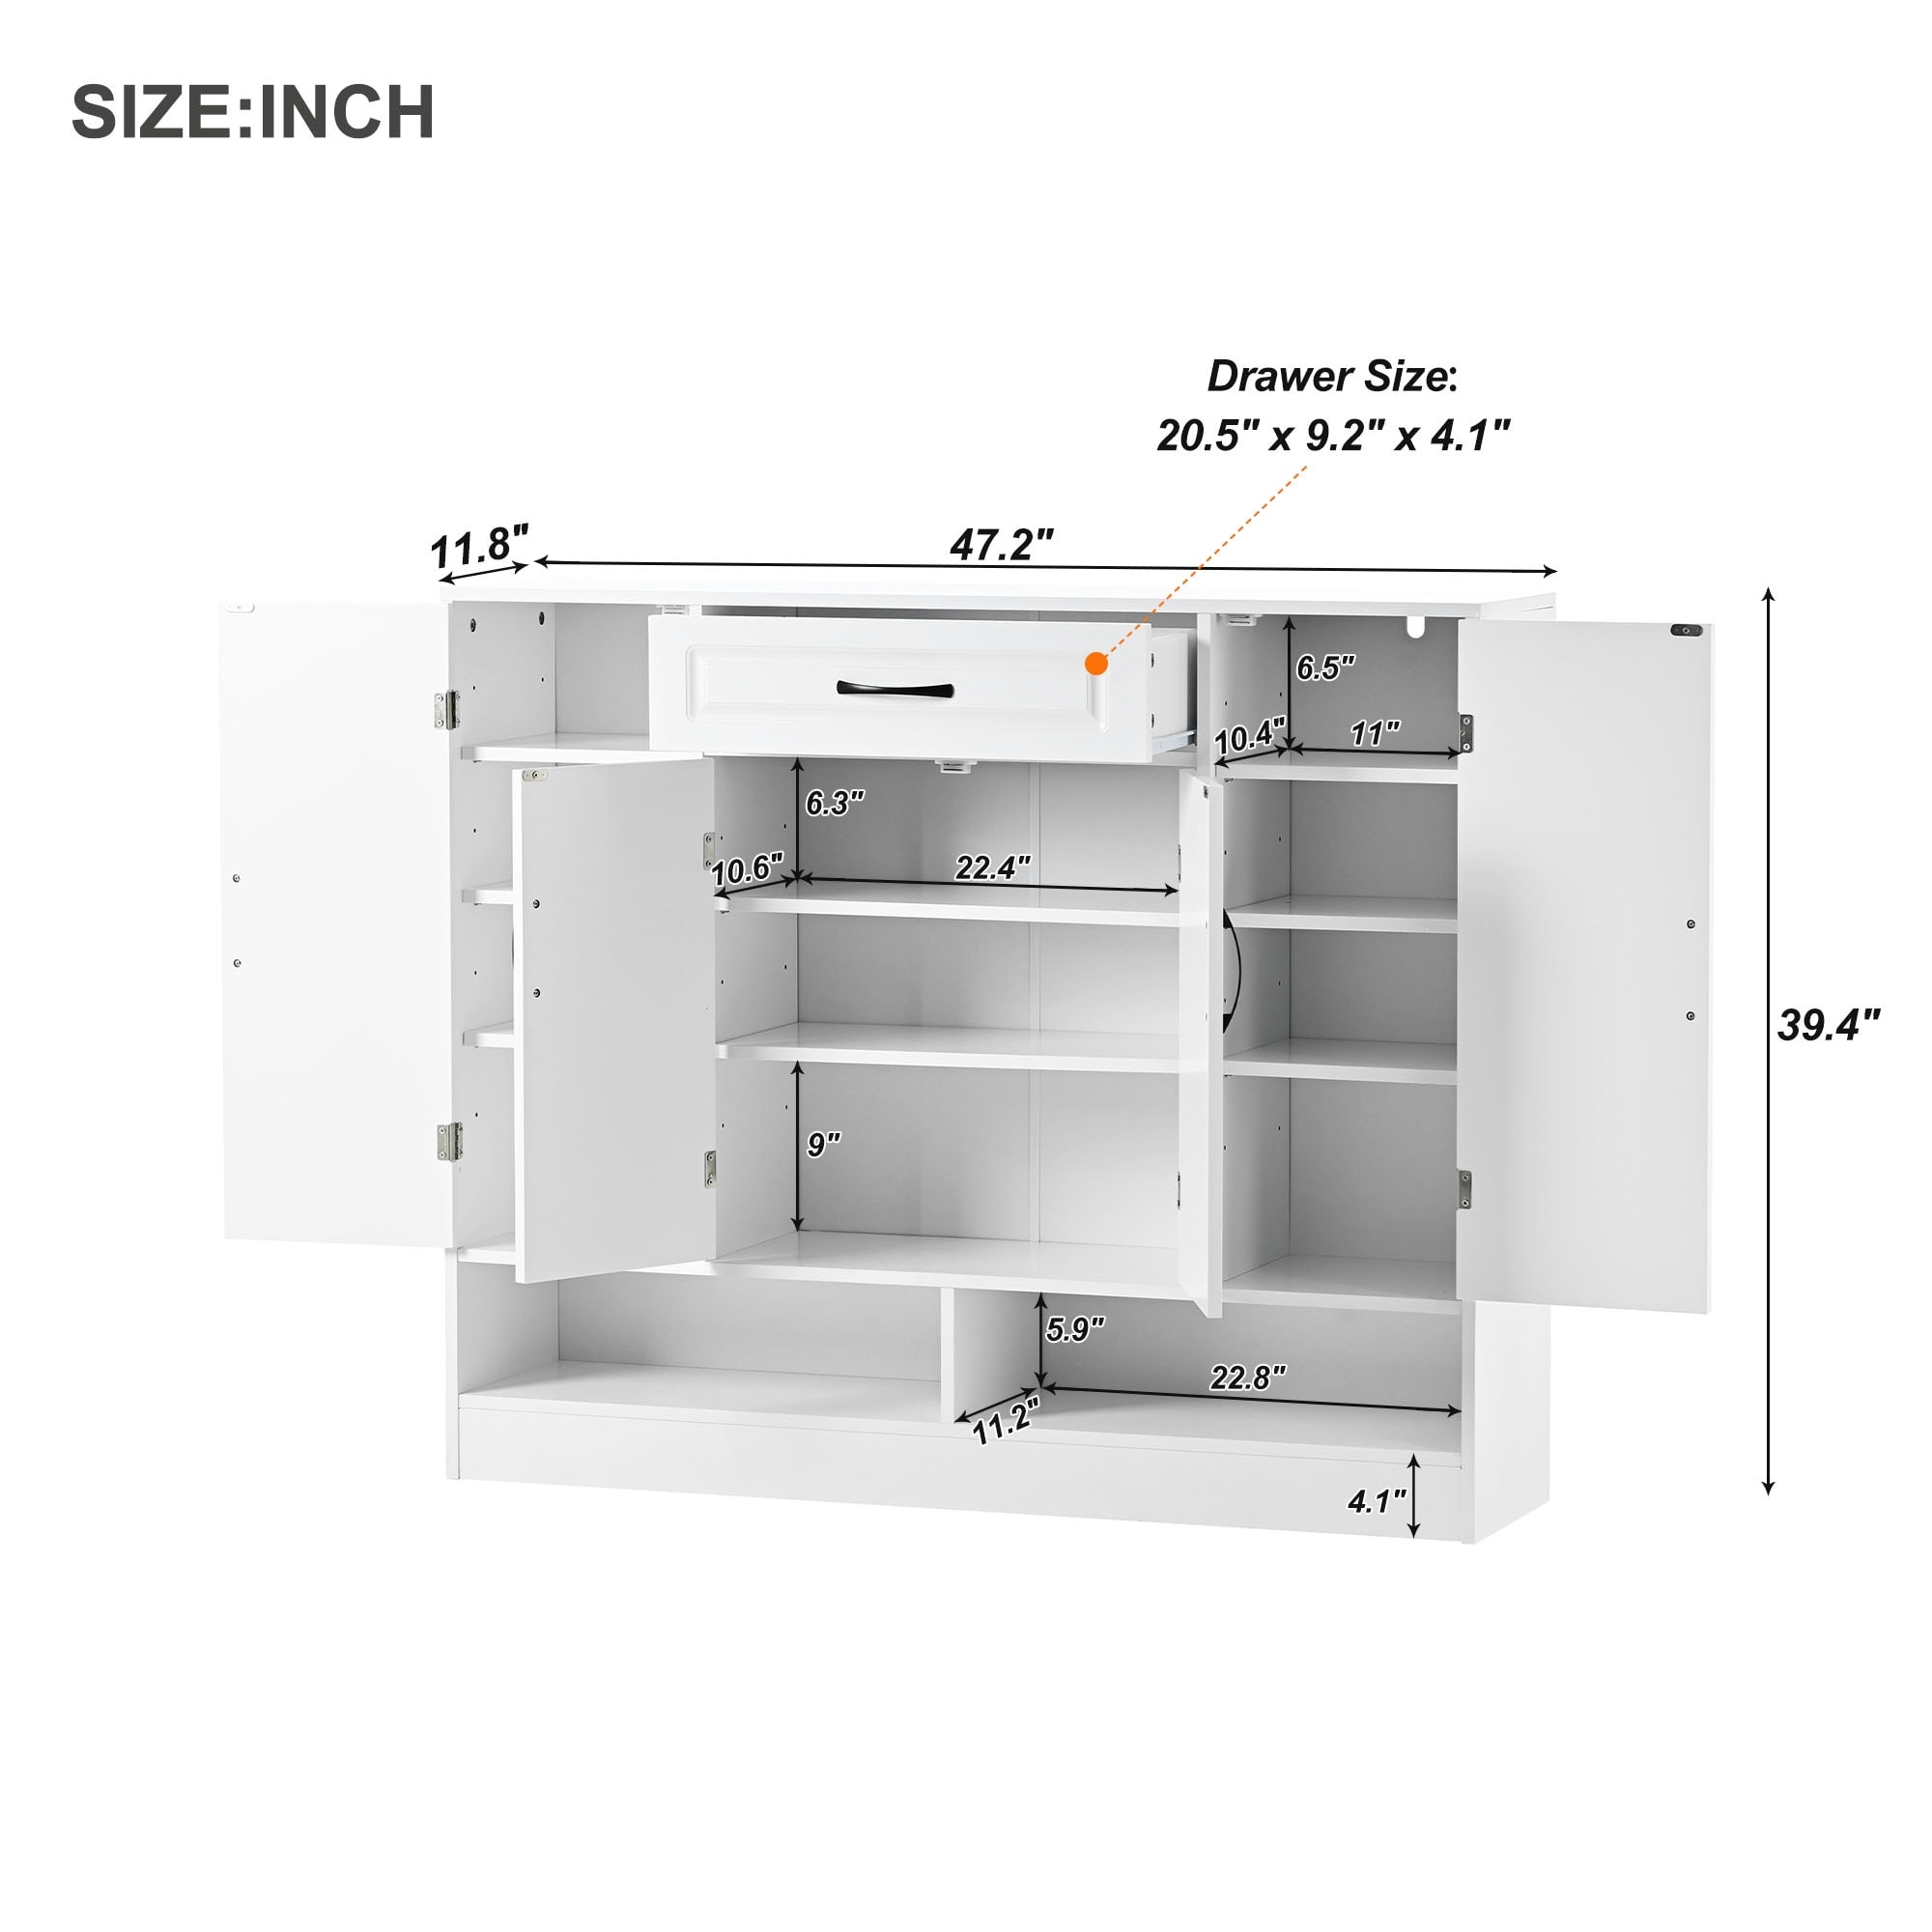 https://ak1.ostkcdn.com/images/products/is/images/direct/165cf31d3c3b0103b002f7e813bb5db639acc780/Shoe-Cabinet-for-Entryway%2C-Modern-Free-Standing-Shoe-Storage-Cabinets%2C-Shoe-Organizer-Cabinet-with-Adjustable-Shelves.jpg